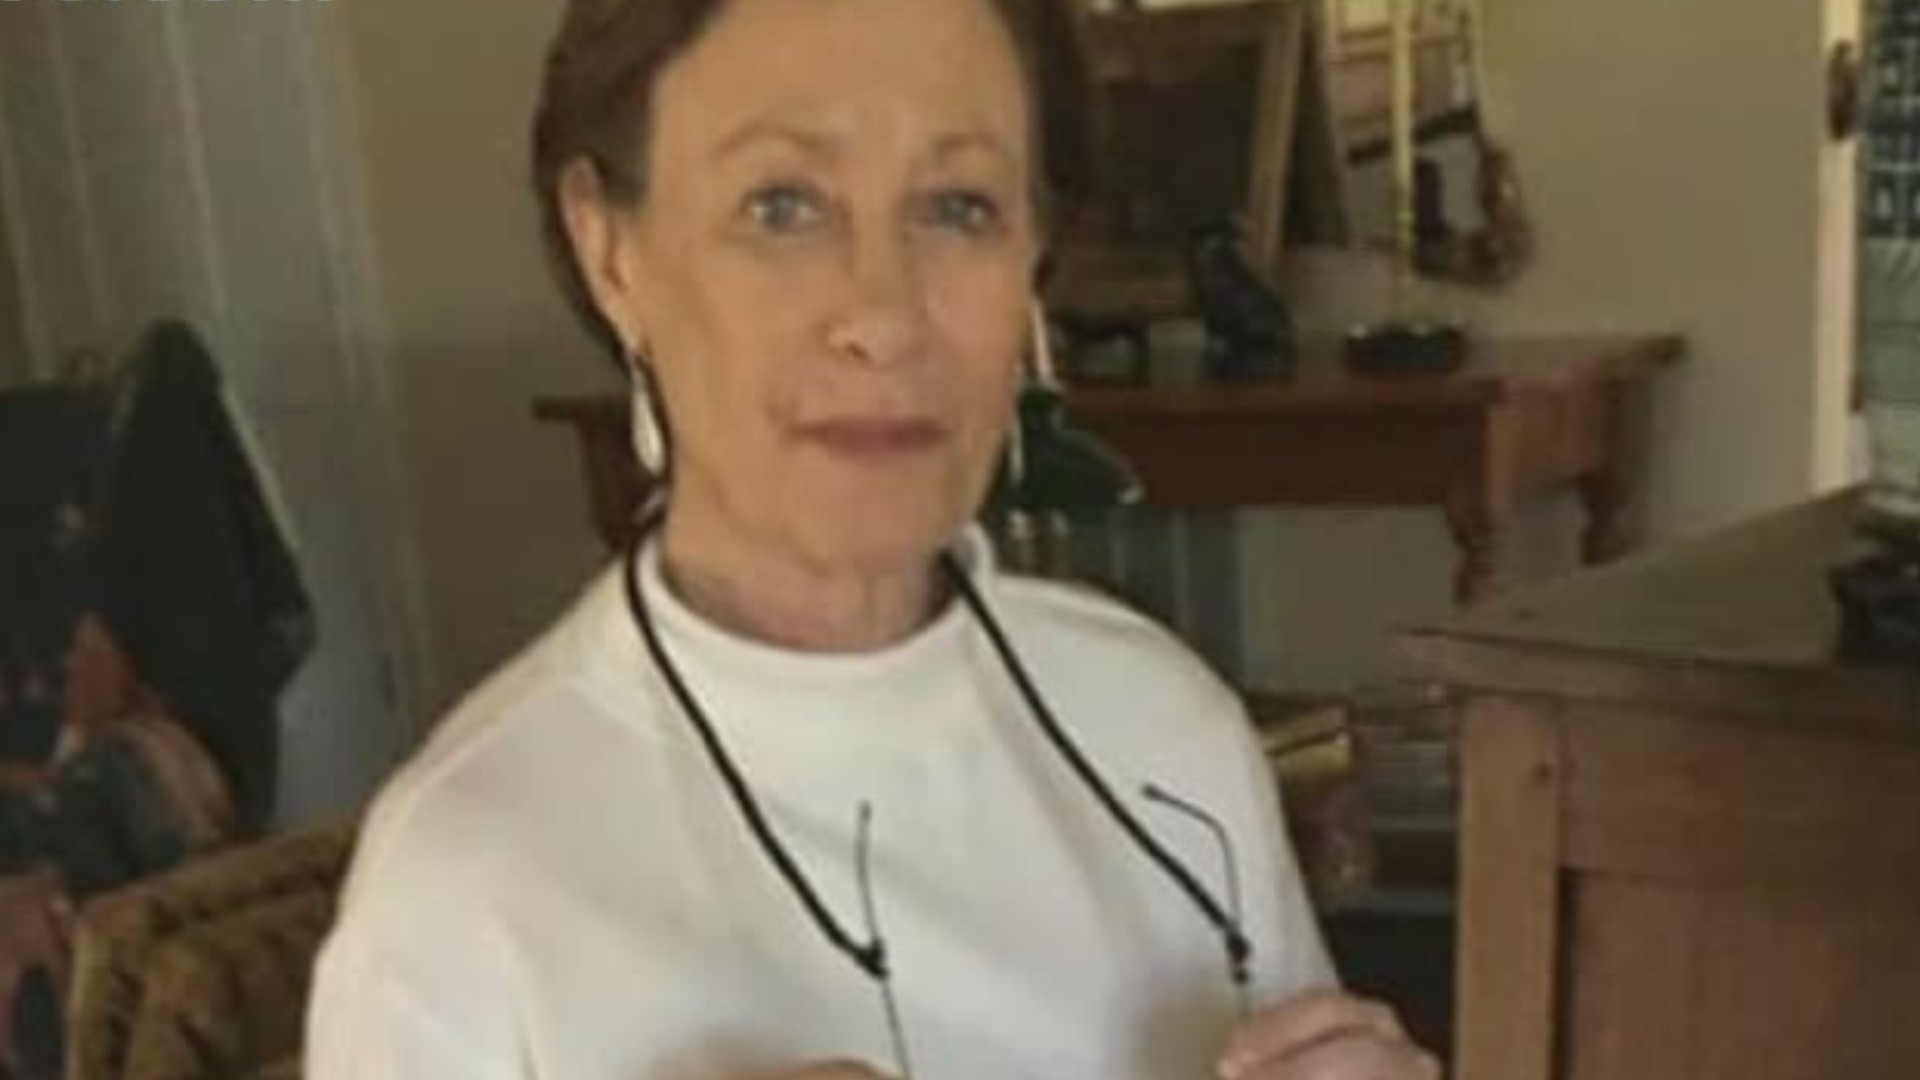 The Coweta County Sheriff's Office is asking everyone to be on the lookout for 65-year-old Terri Mullins